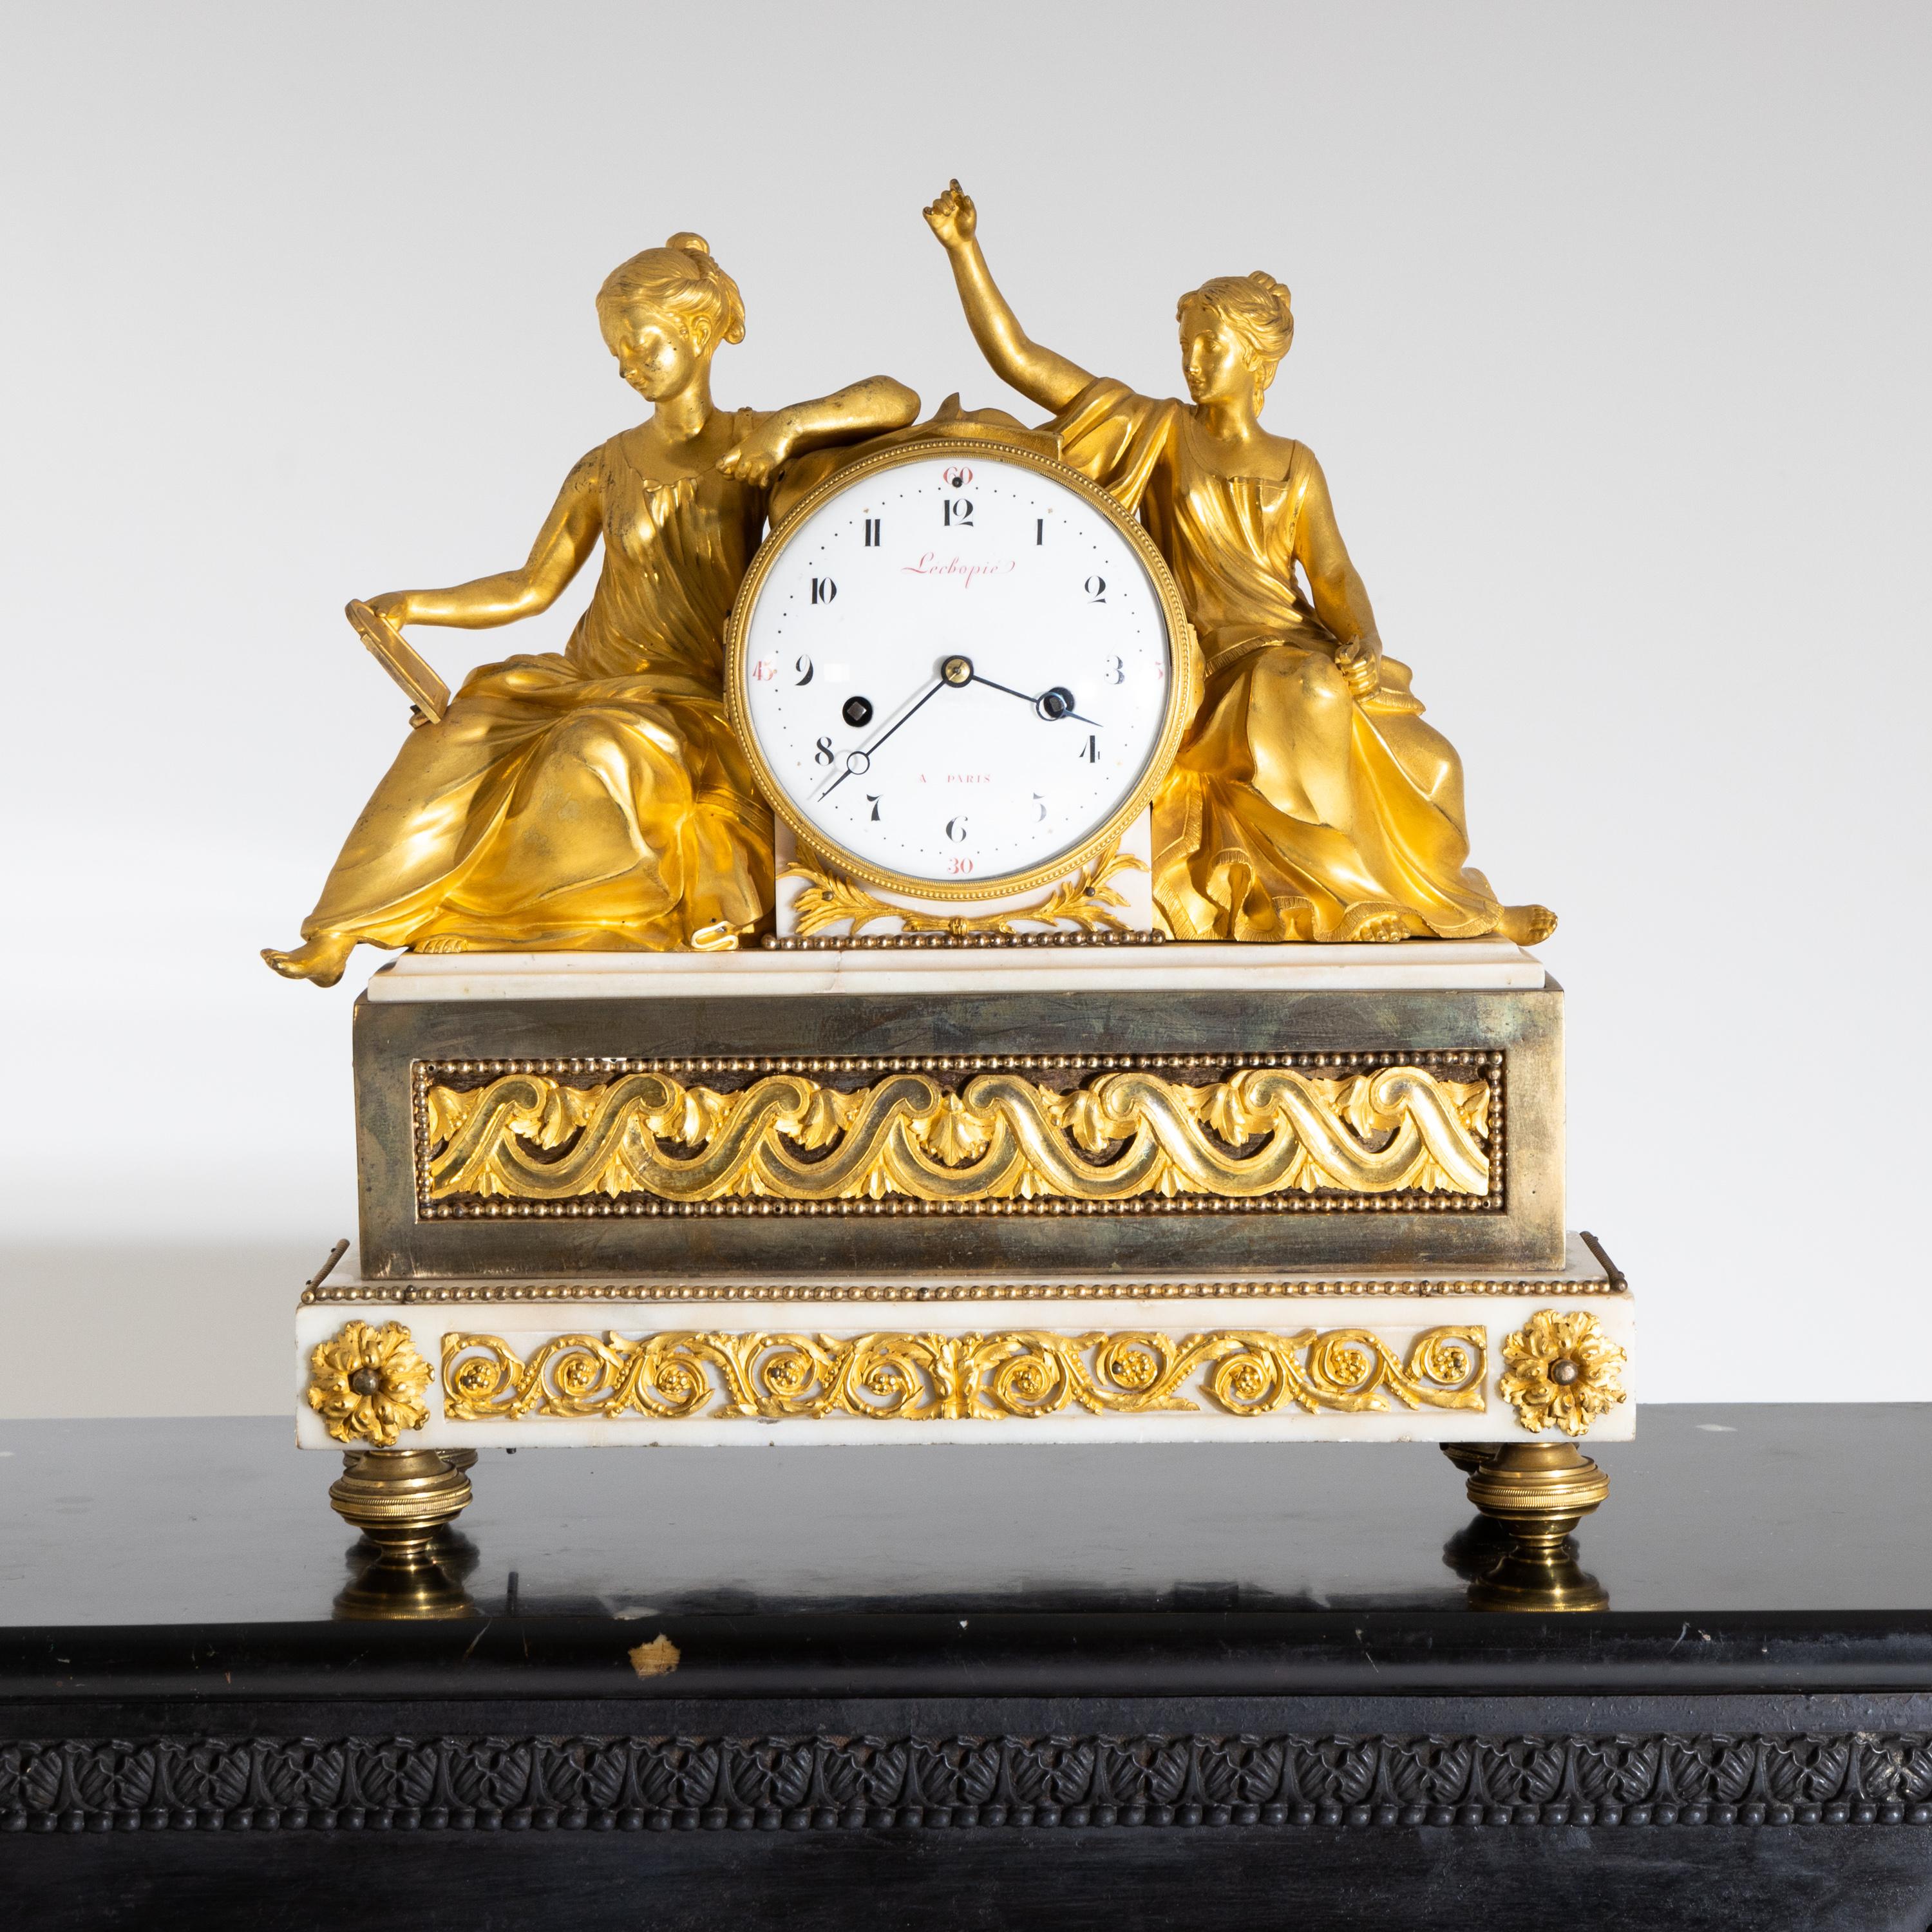 Movement: Adam Léchopié à Paris (1724/ from 1758 Master - 1795), signed on the dial and on the back of the plate. Marble and gilded bronze. The bronzes are probably from the workshop of Robert Osmond (1712-1782). Lit.: S. de Ricci (ed.): Der Stil